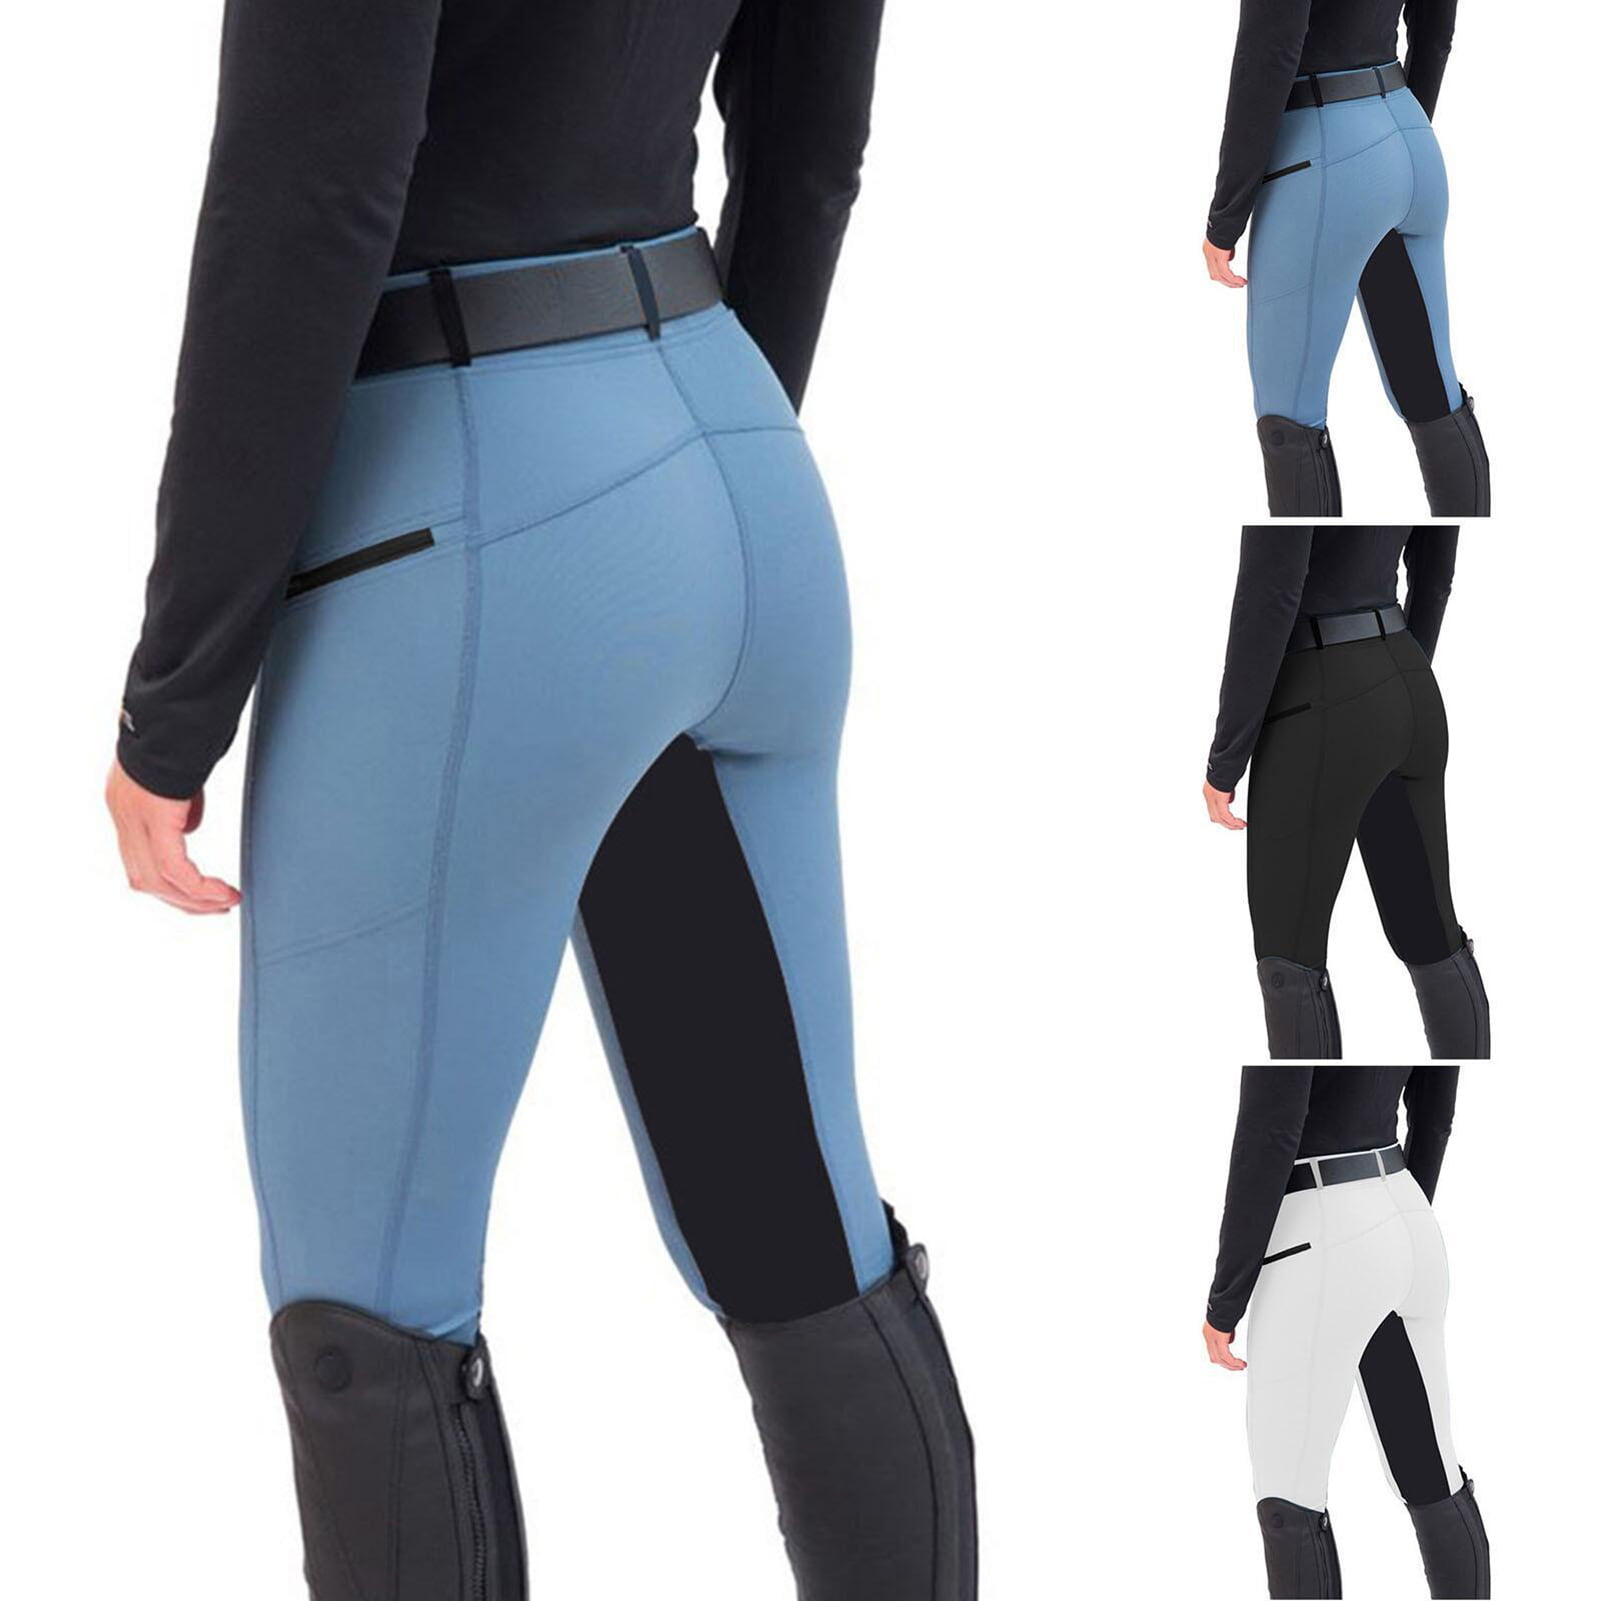 Happy Date Women's Horse Riding Pants Exercise High Waist Breeches Sport  Riding Equestrian Trousers Yoga Leggings Tights 